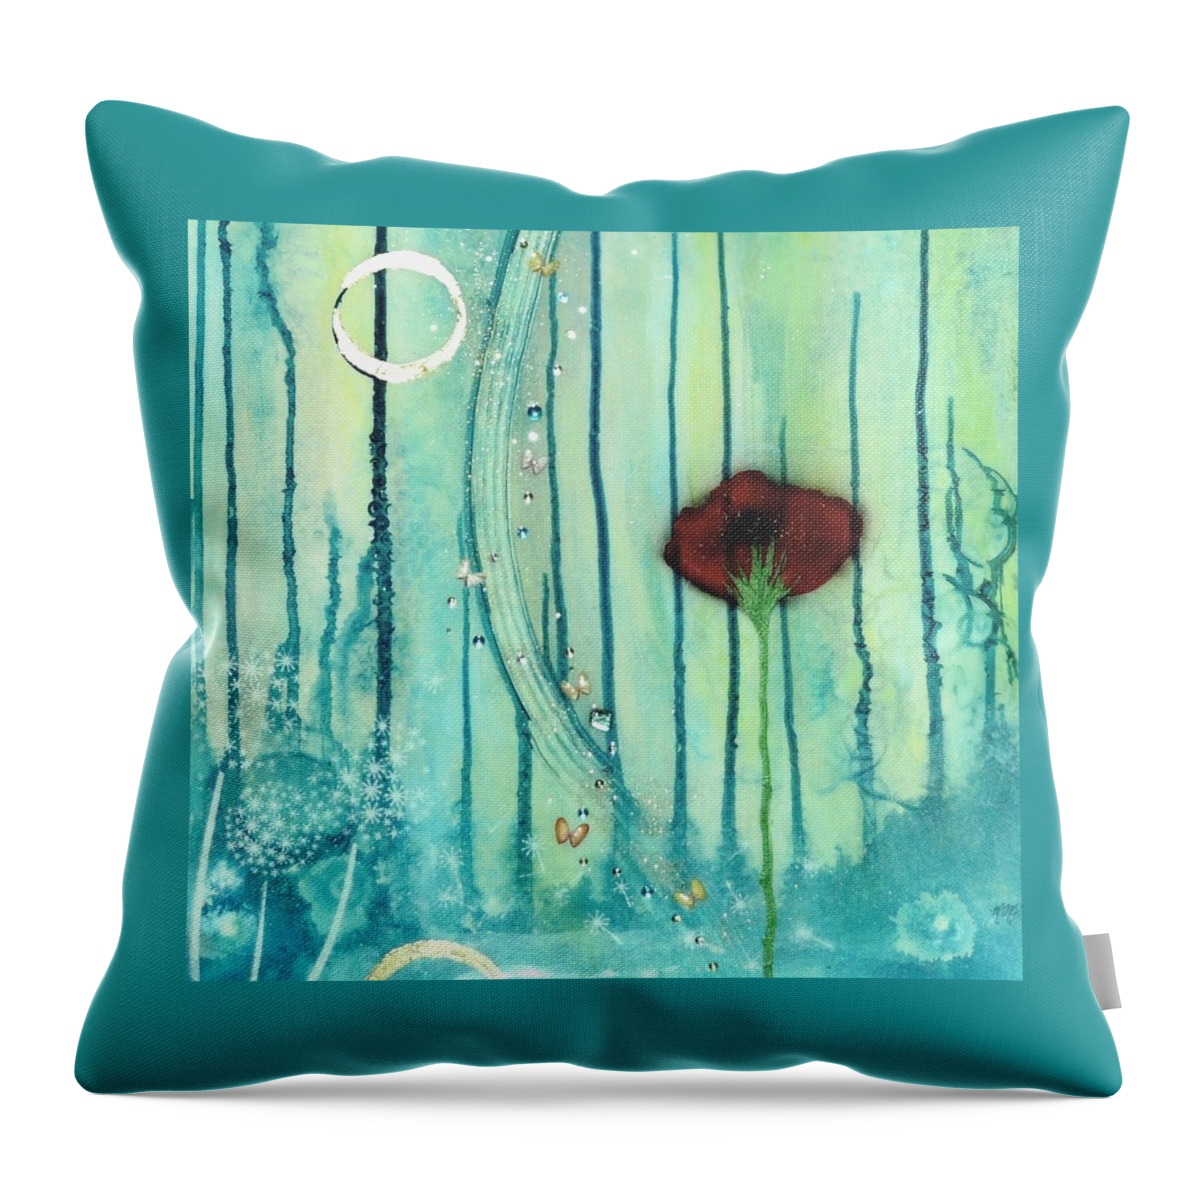  Throw Pillow featuring the painting Transformation by MiMi Stirn